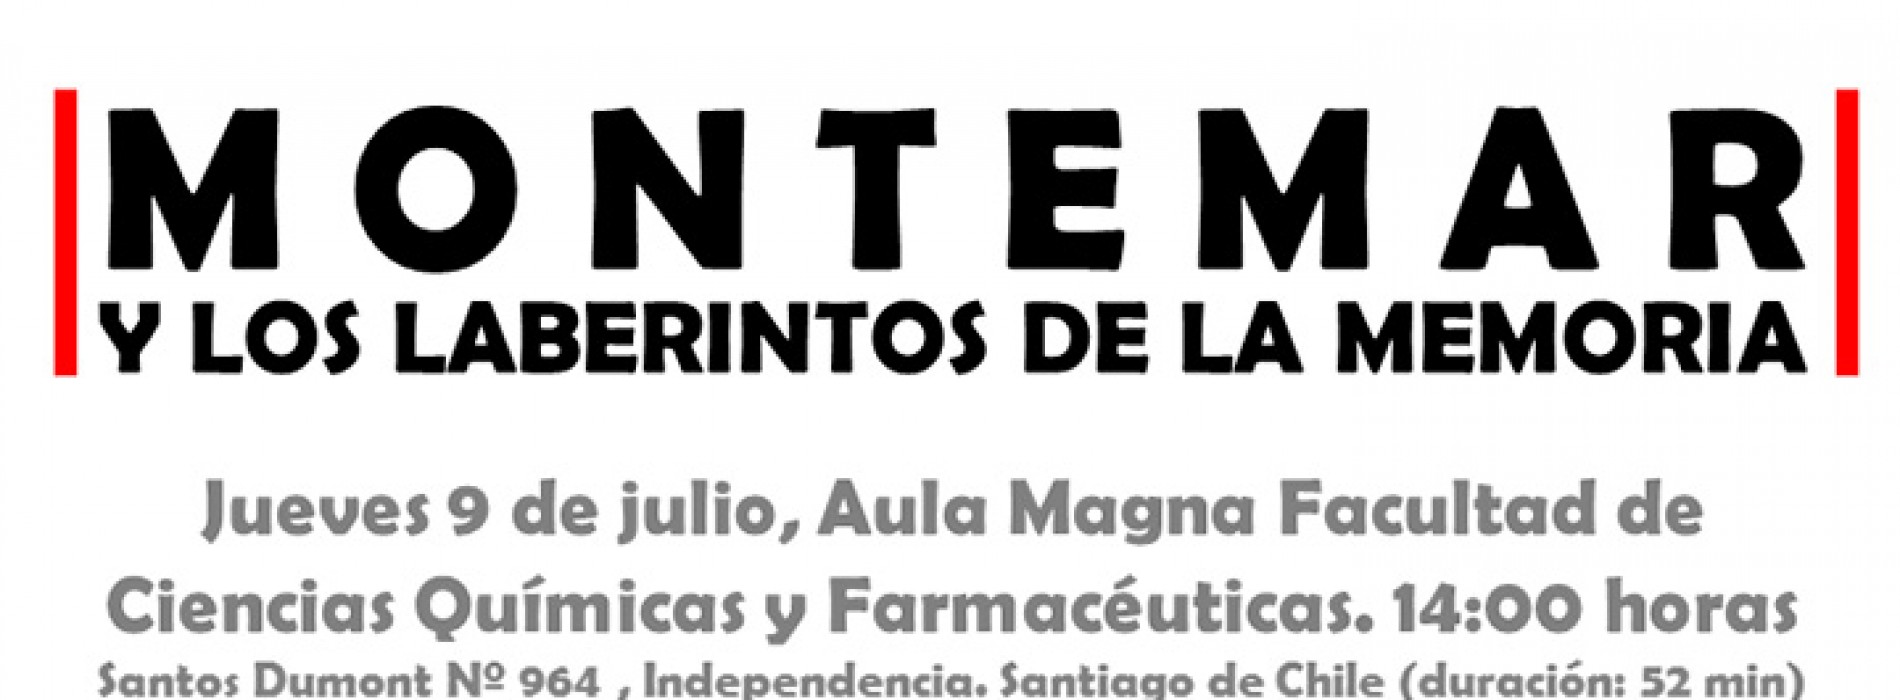 Documentary about Montemar, Universidad de Chile - Thursday, July 9 at 14:00 hrs.